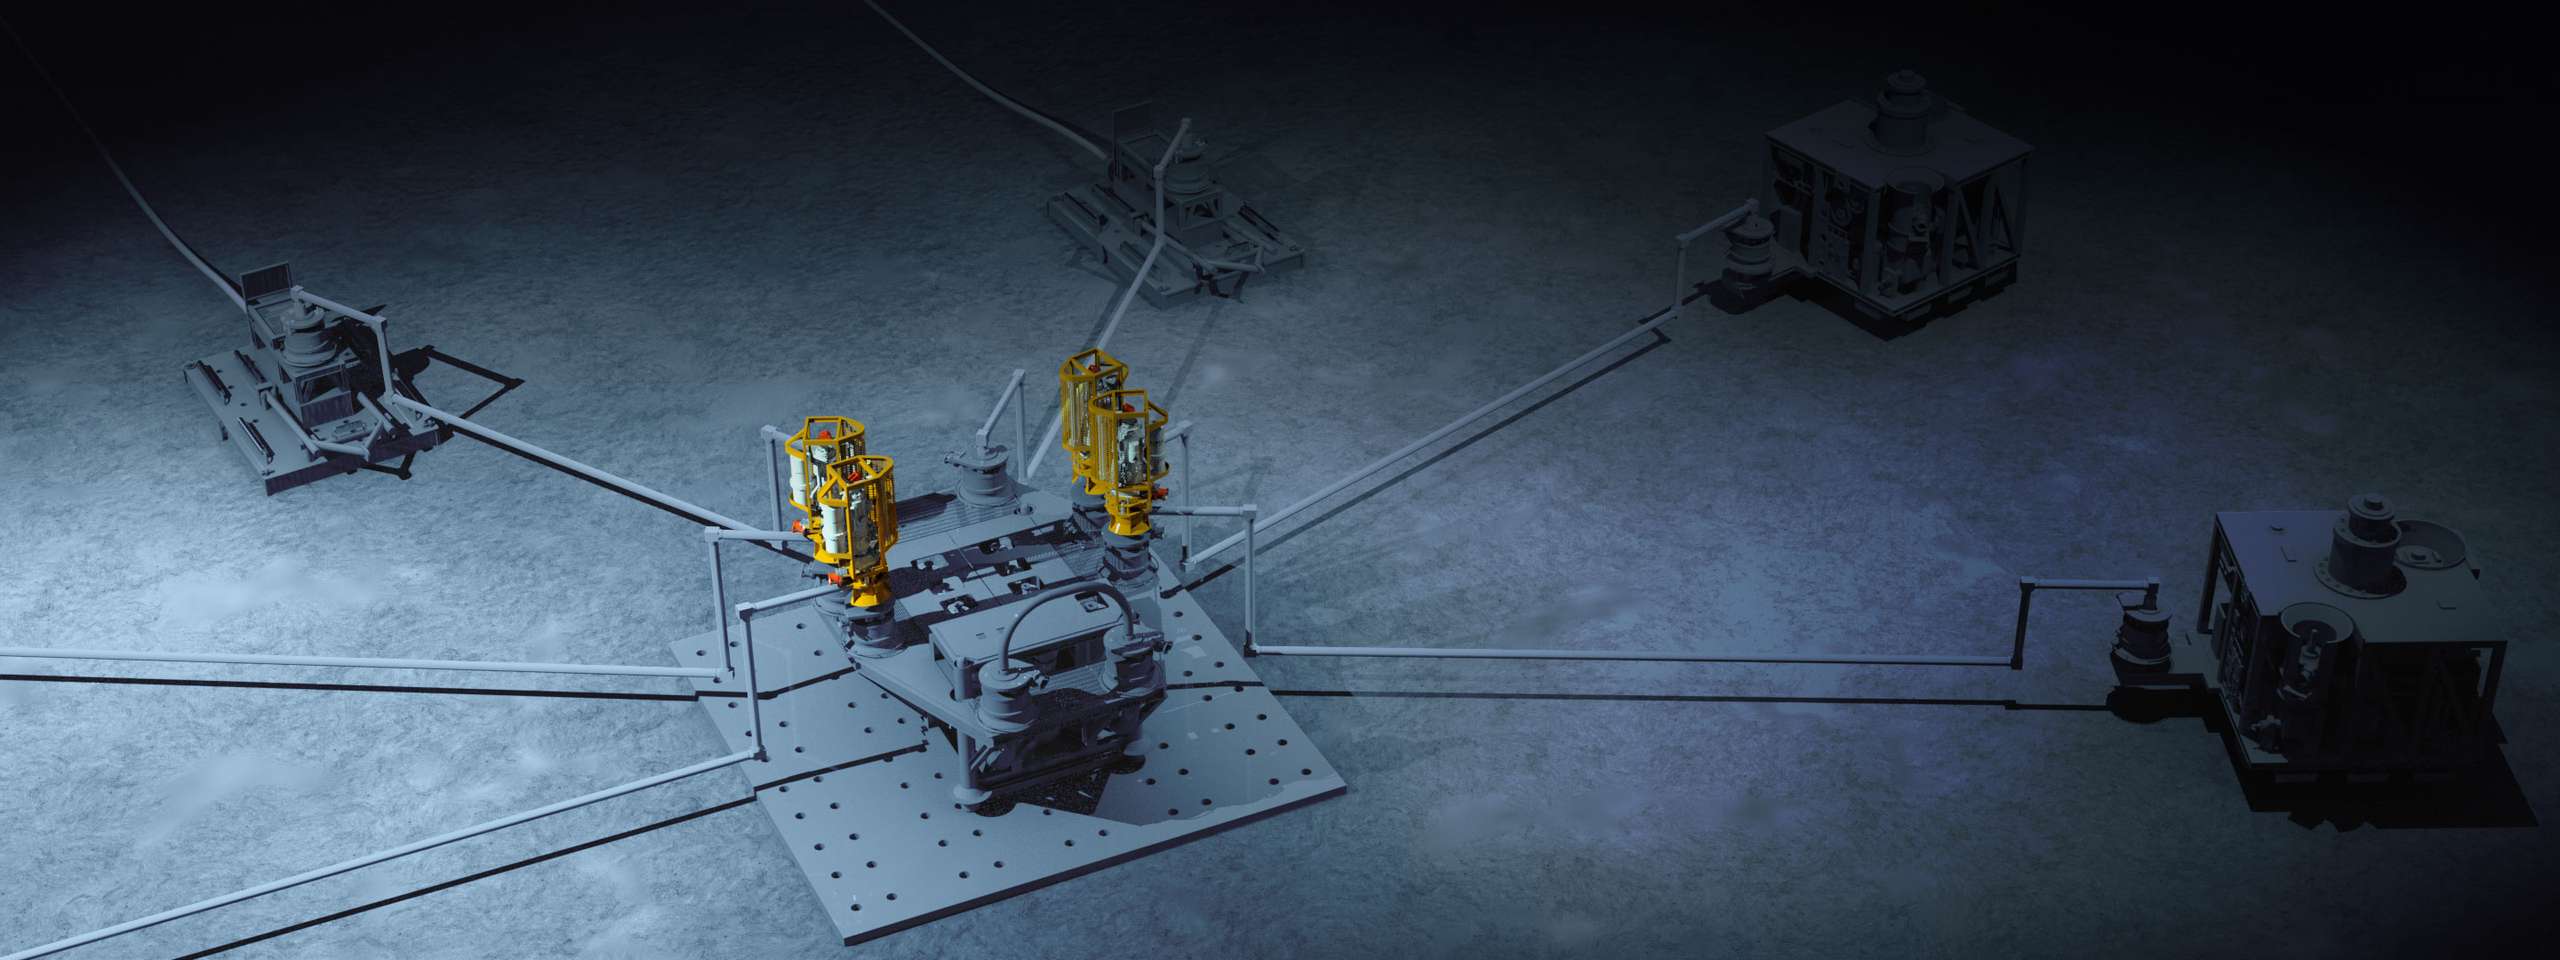 3D render of a subsea project in Gulf of Mexico